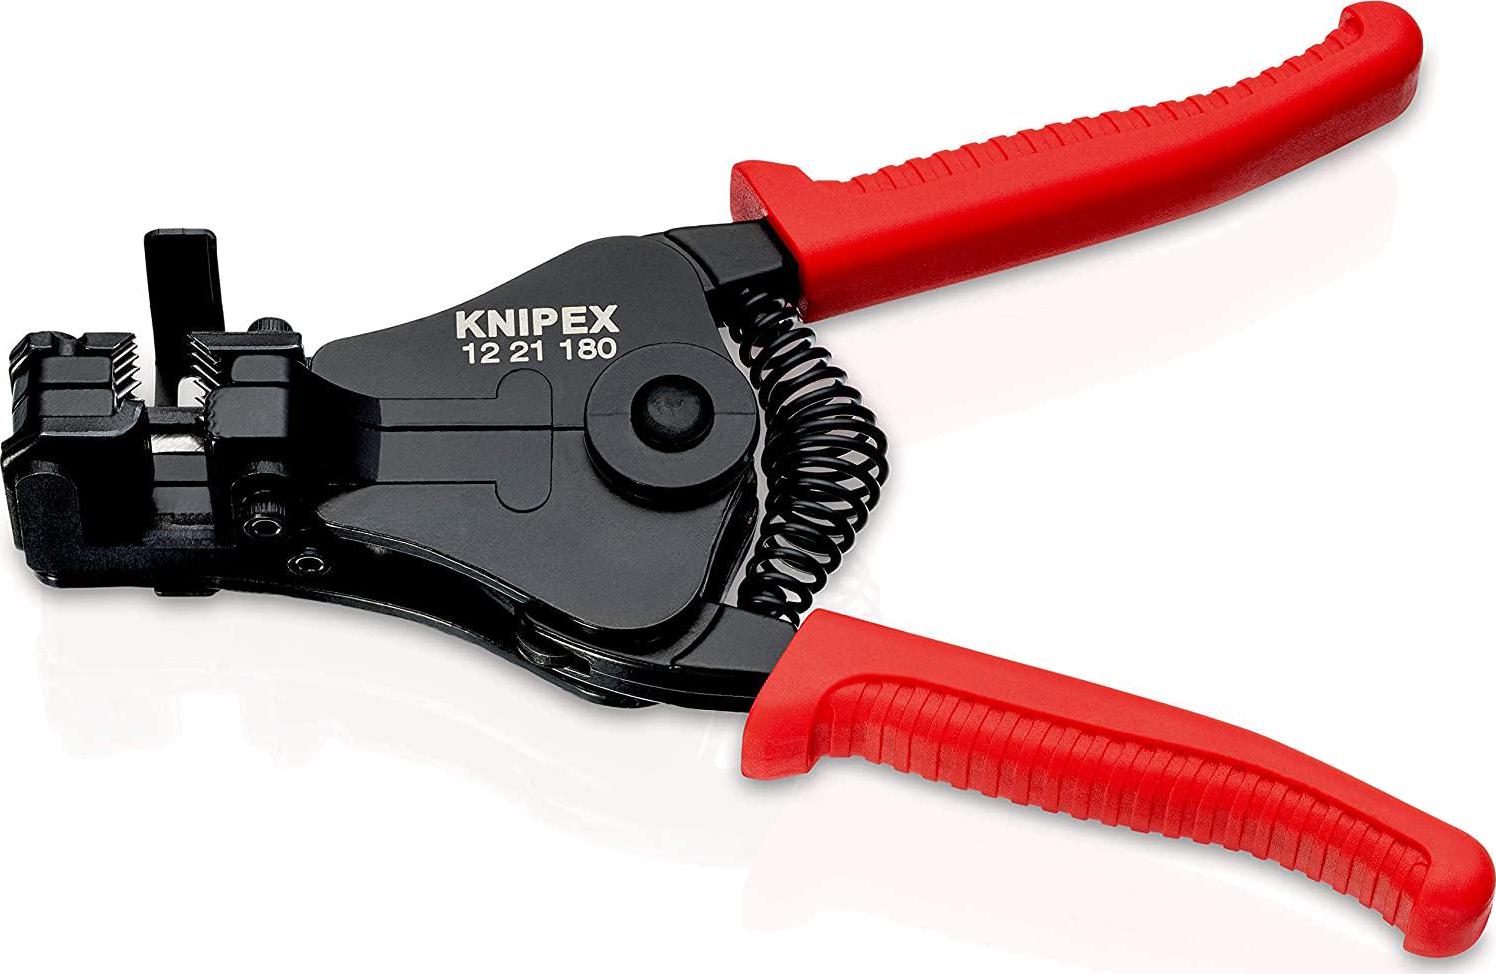 KNIPEX, Knipex 12 21 180 Insulation Strippers 7,09 with adapted blades